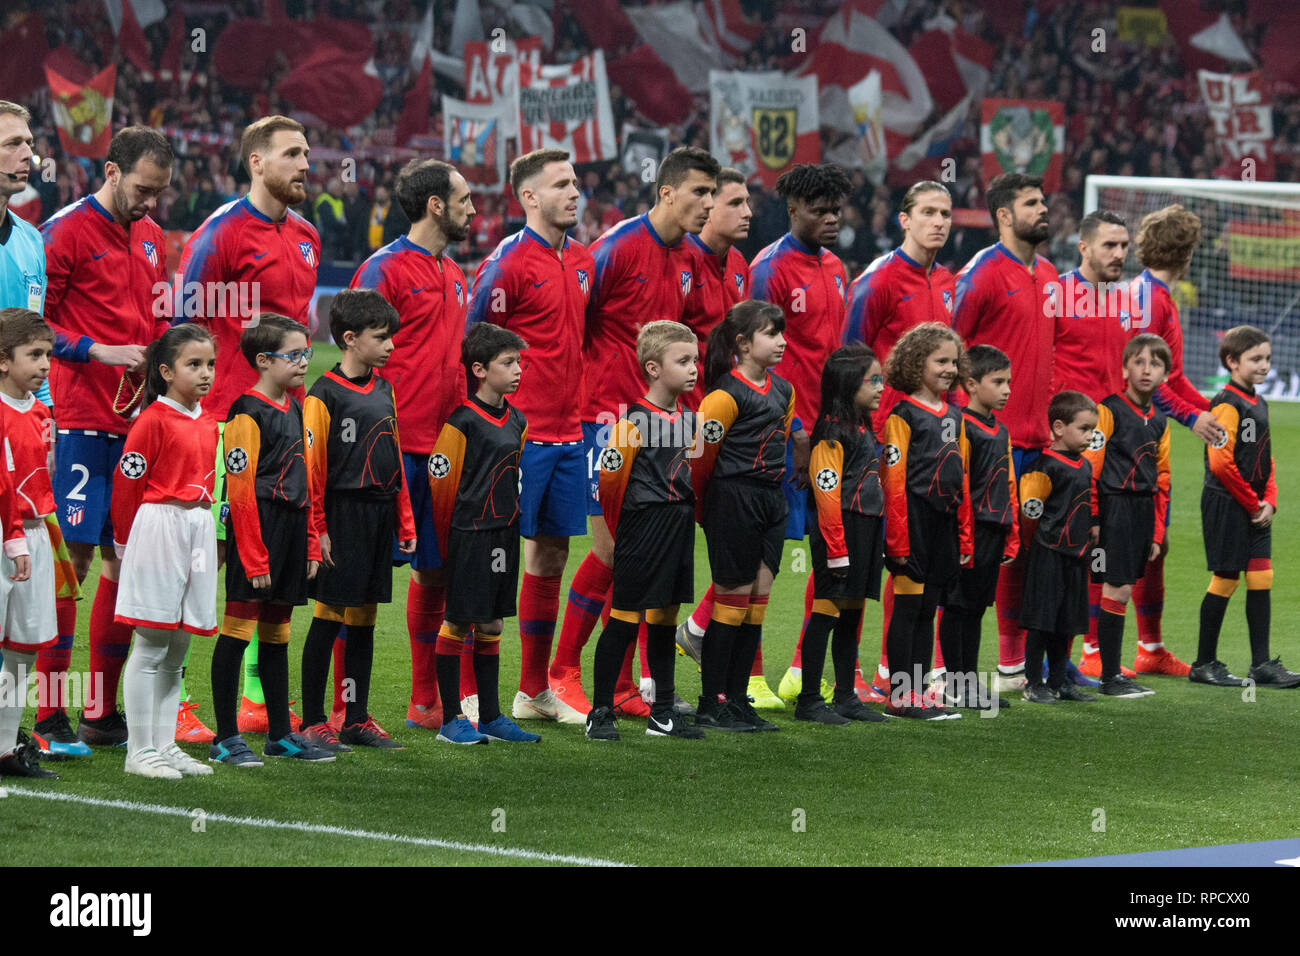 Madrid, Spain. 20th Feb, 2019. During the match between Atletico de Madrid and . Juventus . Atletico de Madrid wons 2 to 0 over Juventus with the goals of Gimenez and Godin. Credit: Jorge Gonzalez/Pacific Press/Alamy Live News Stock Photo